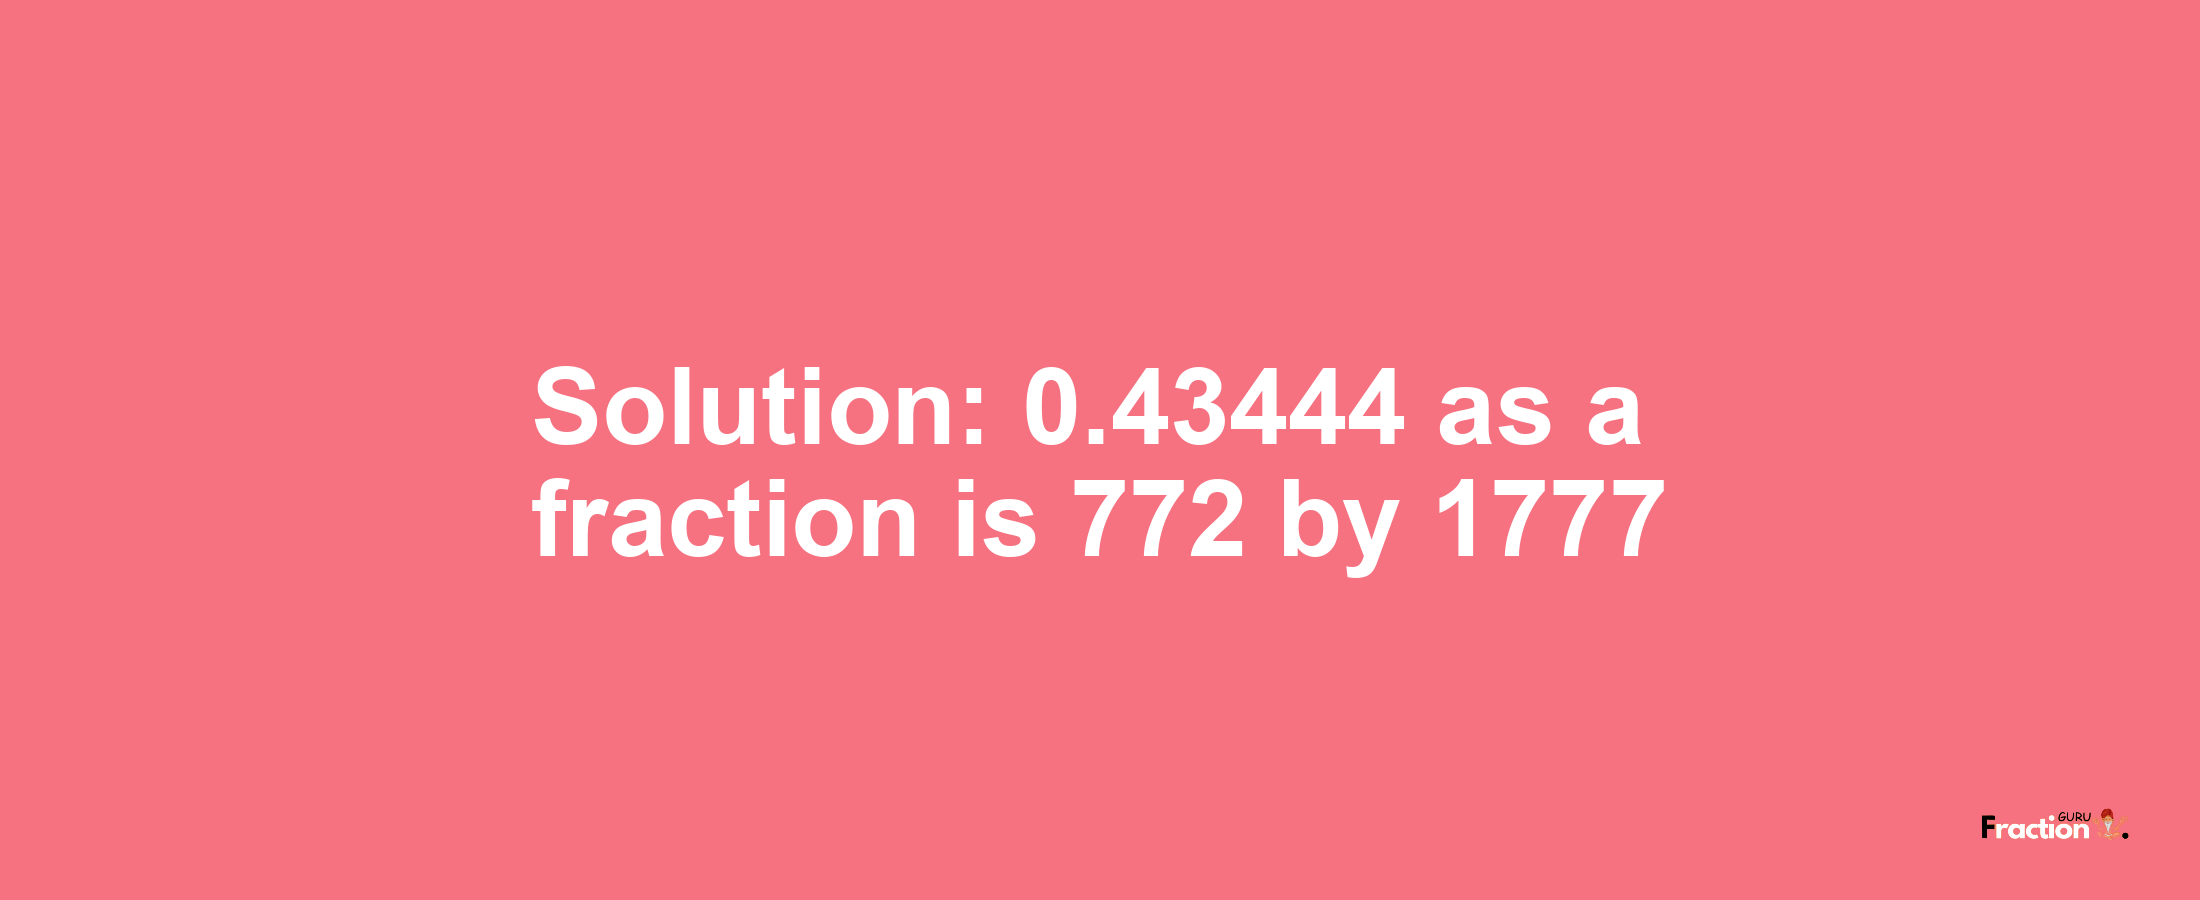 Solution:0.43444 as a fraction is 772/1777